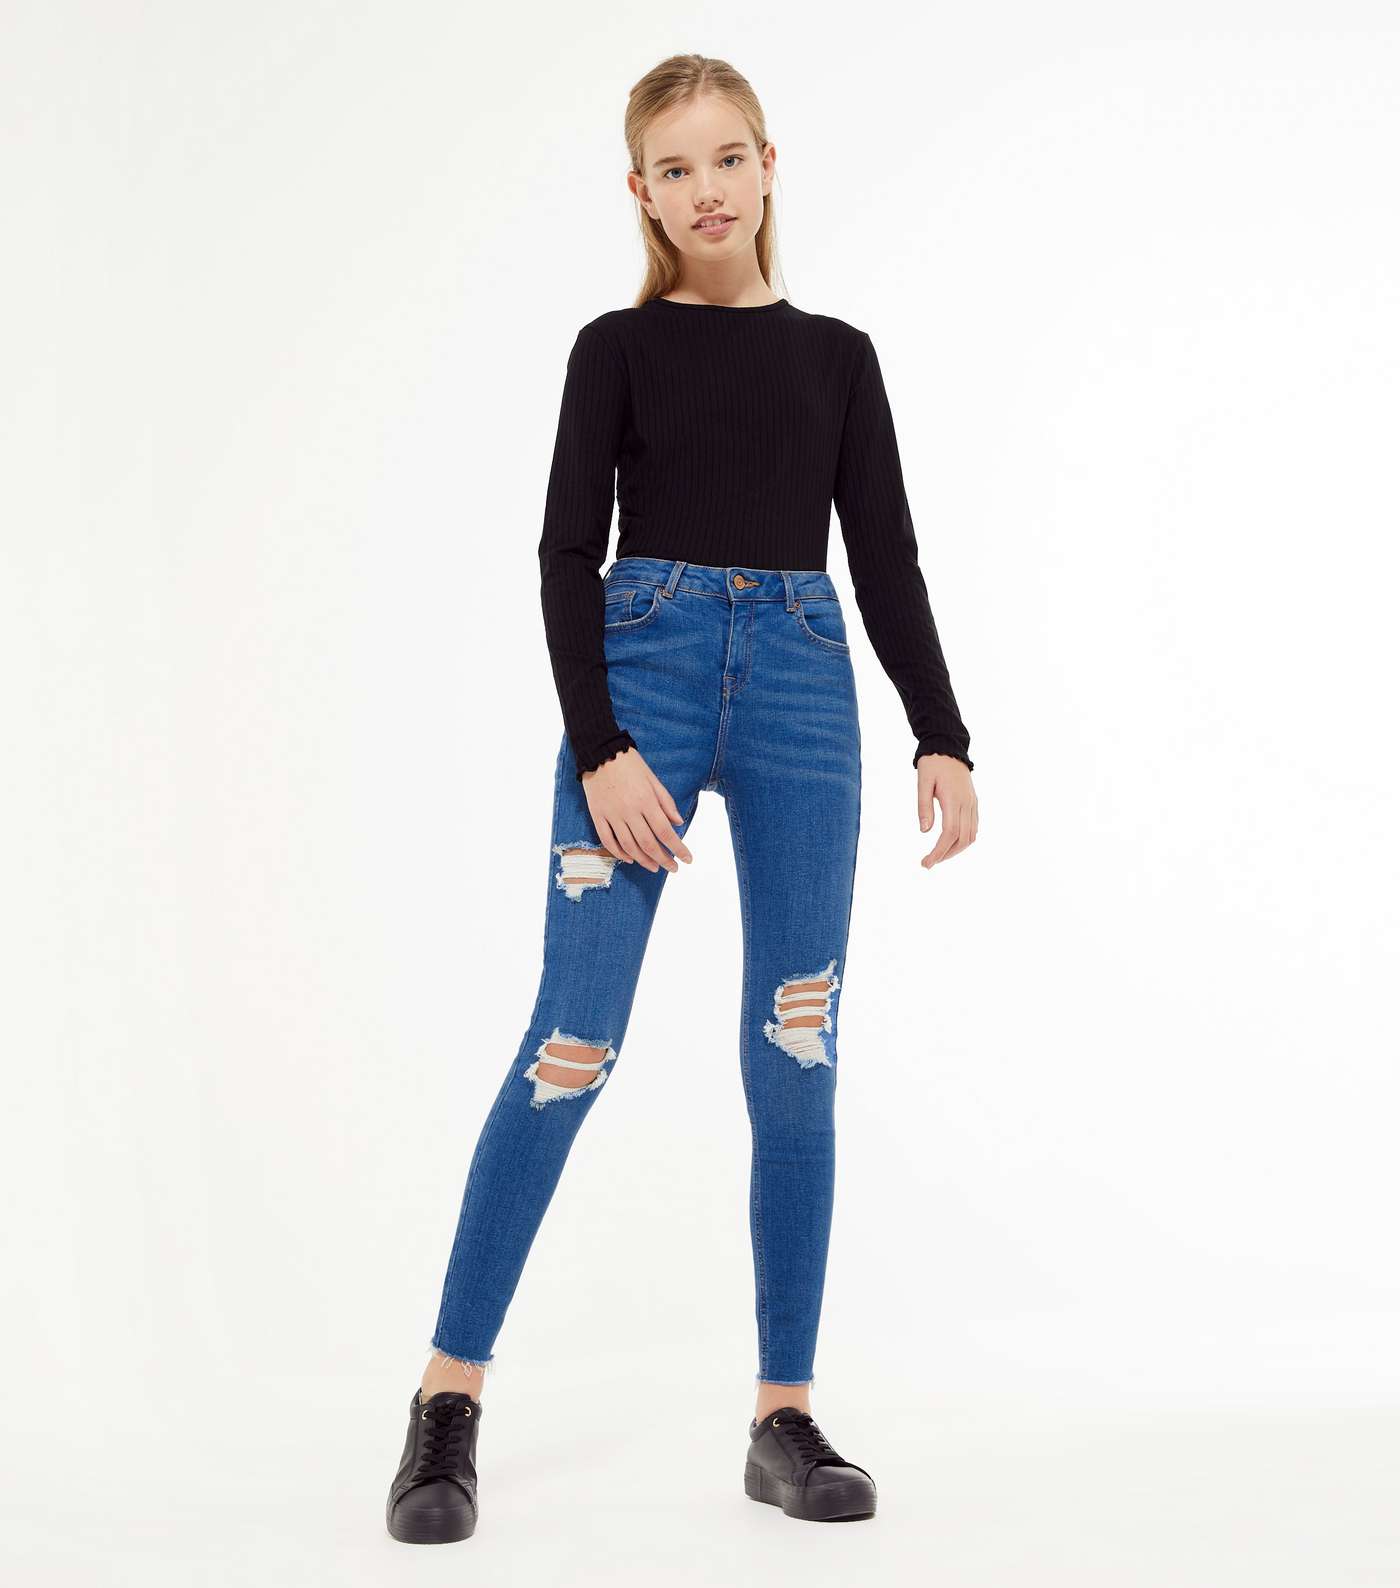 Girls Bright Blue Ripped Skinny Jeans